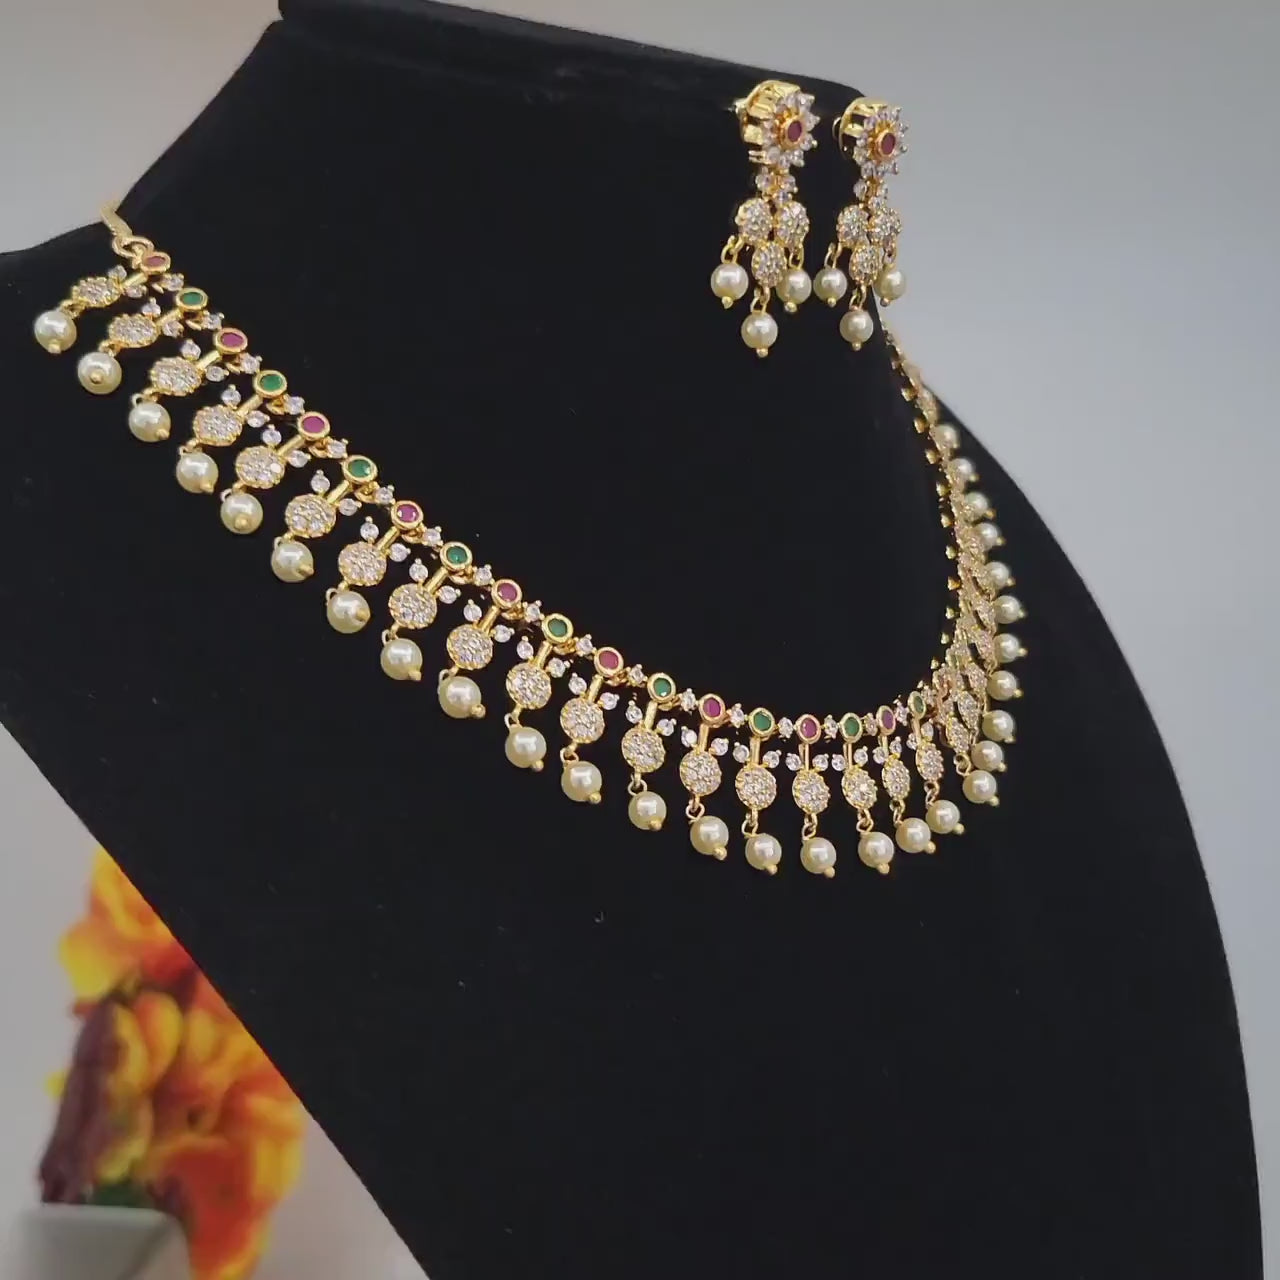 Gold Plated American diamond necklace set with Pearl Drop| Trendy South Indian style Fashion Jewelry| One gram gold CZ AD necklace Earrings